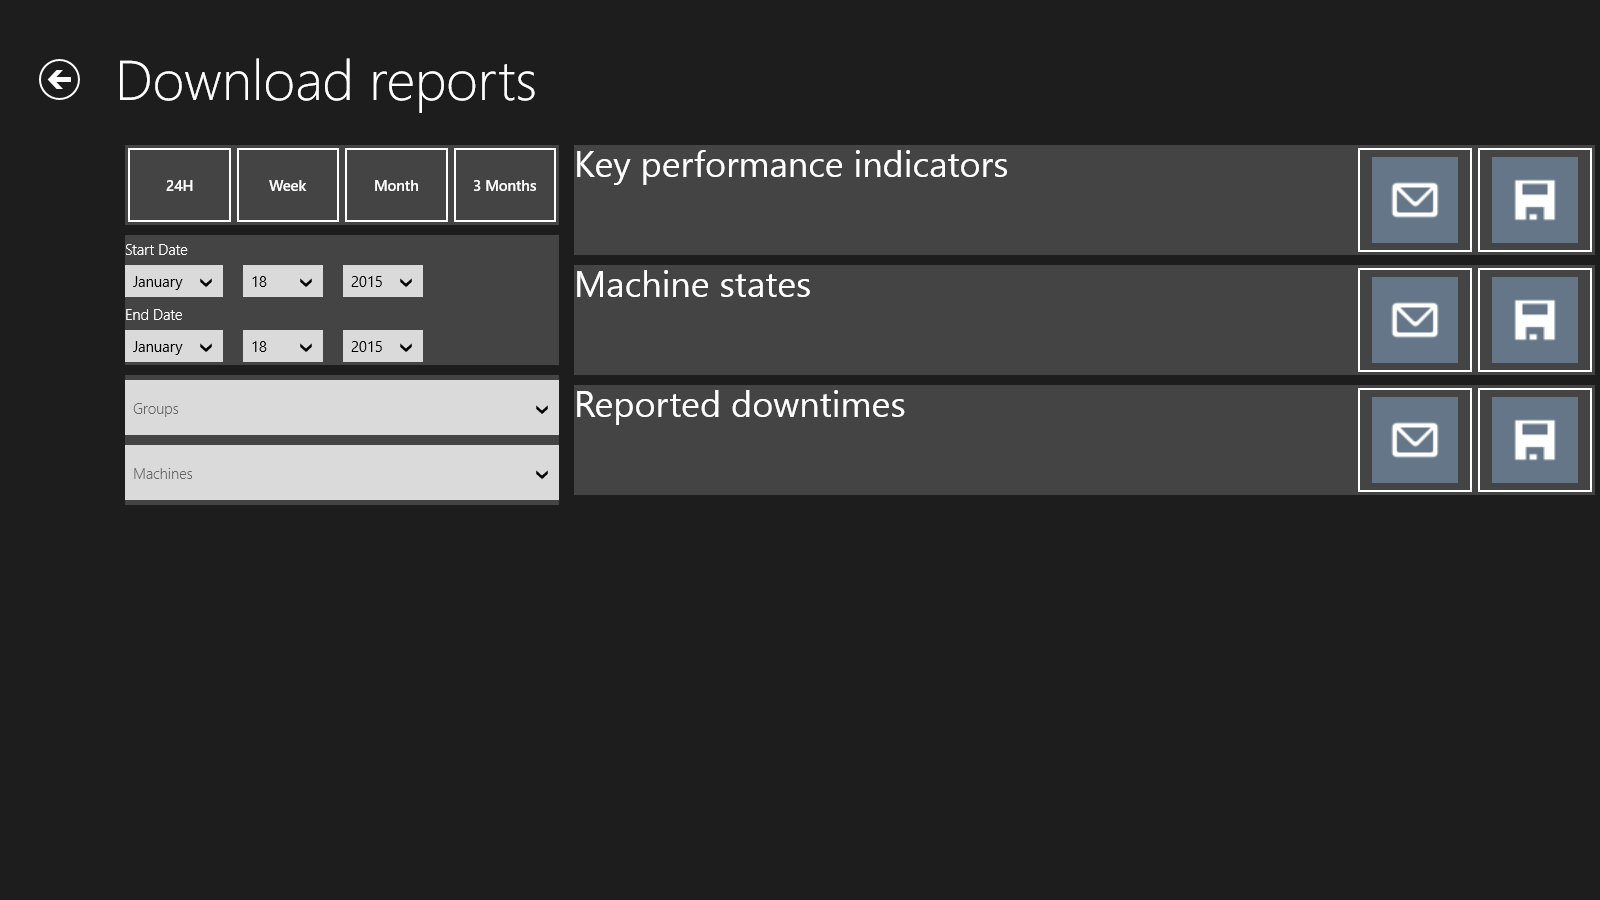 Download reports page